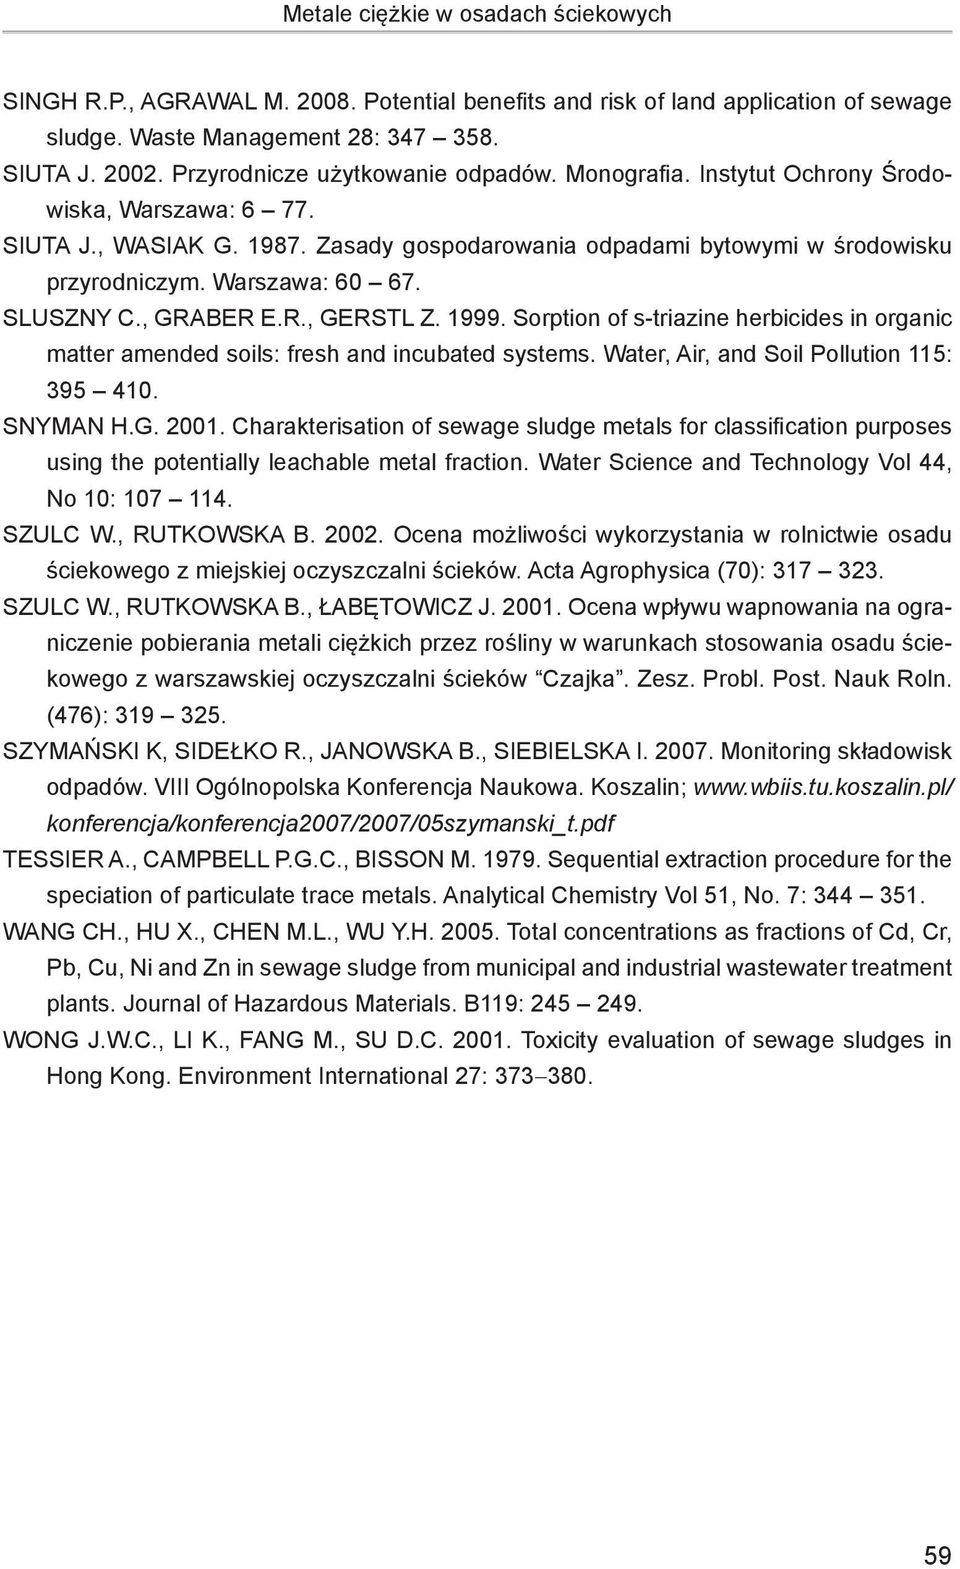 Warszawa: 60 67. Sluszny C., Graber E.R., Gerstl Z. 1999. Sorption of s-triazine herbicides in organic matter amended soils: fresh and incubated systems. Water, Air, and Soil Pollution 115: 395 410.